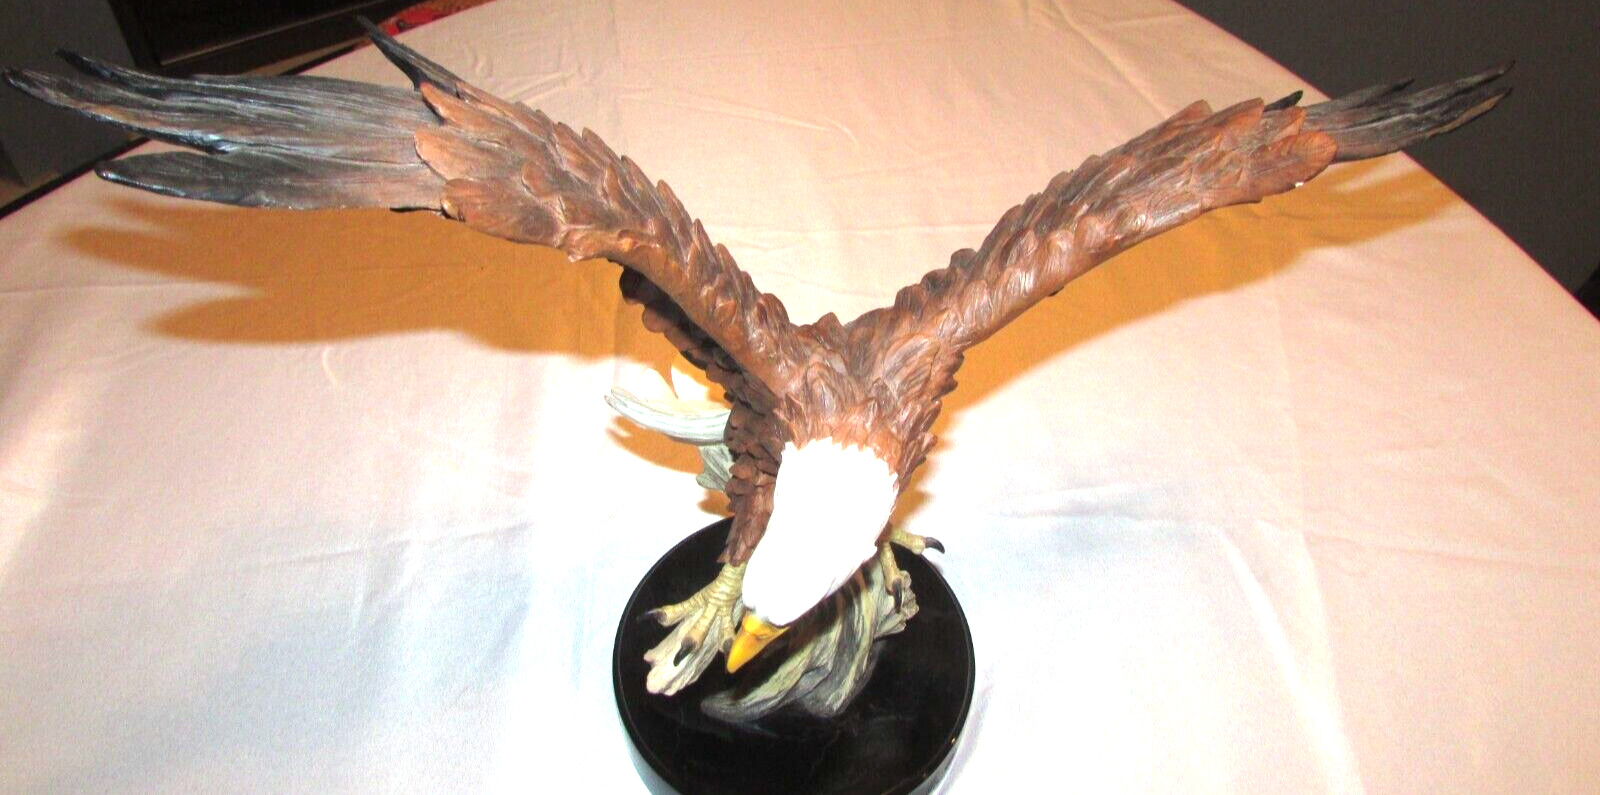 Anheuser Busch F26 “The Lookout” Bald Eagle Cold Cast Statue limited edition